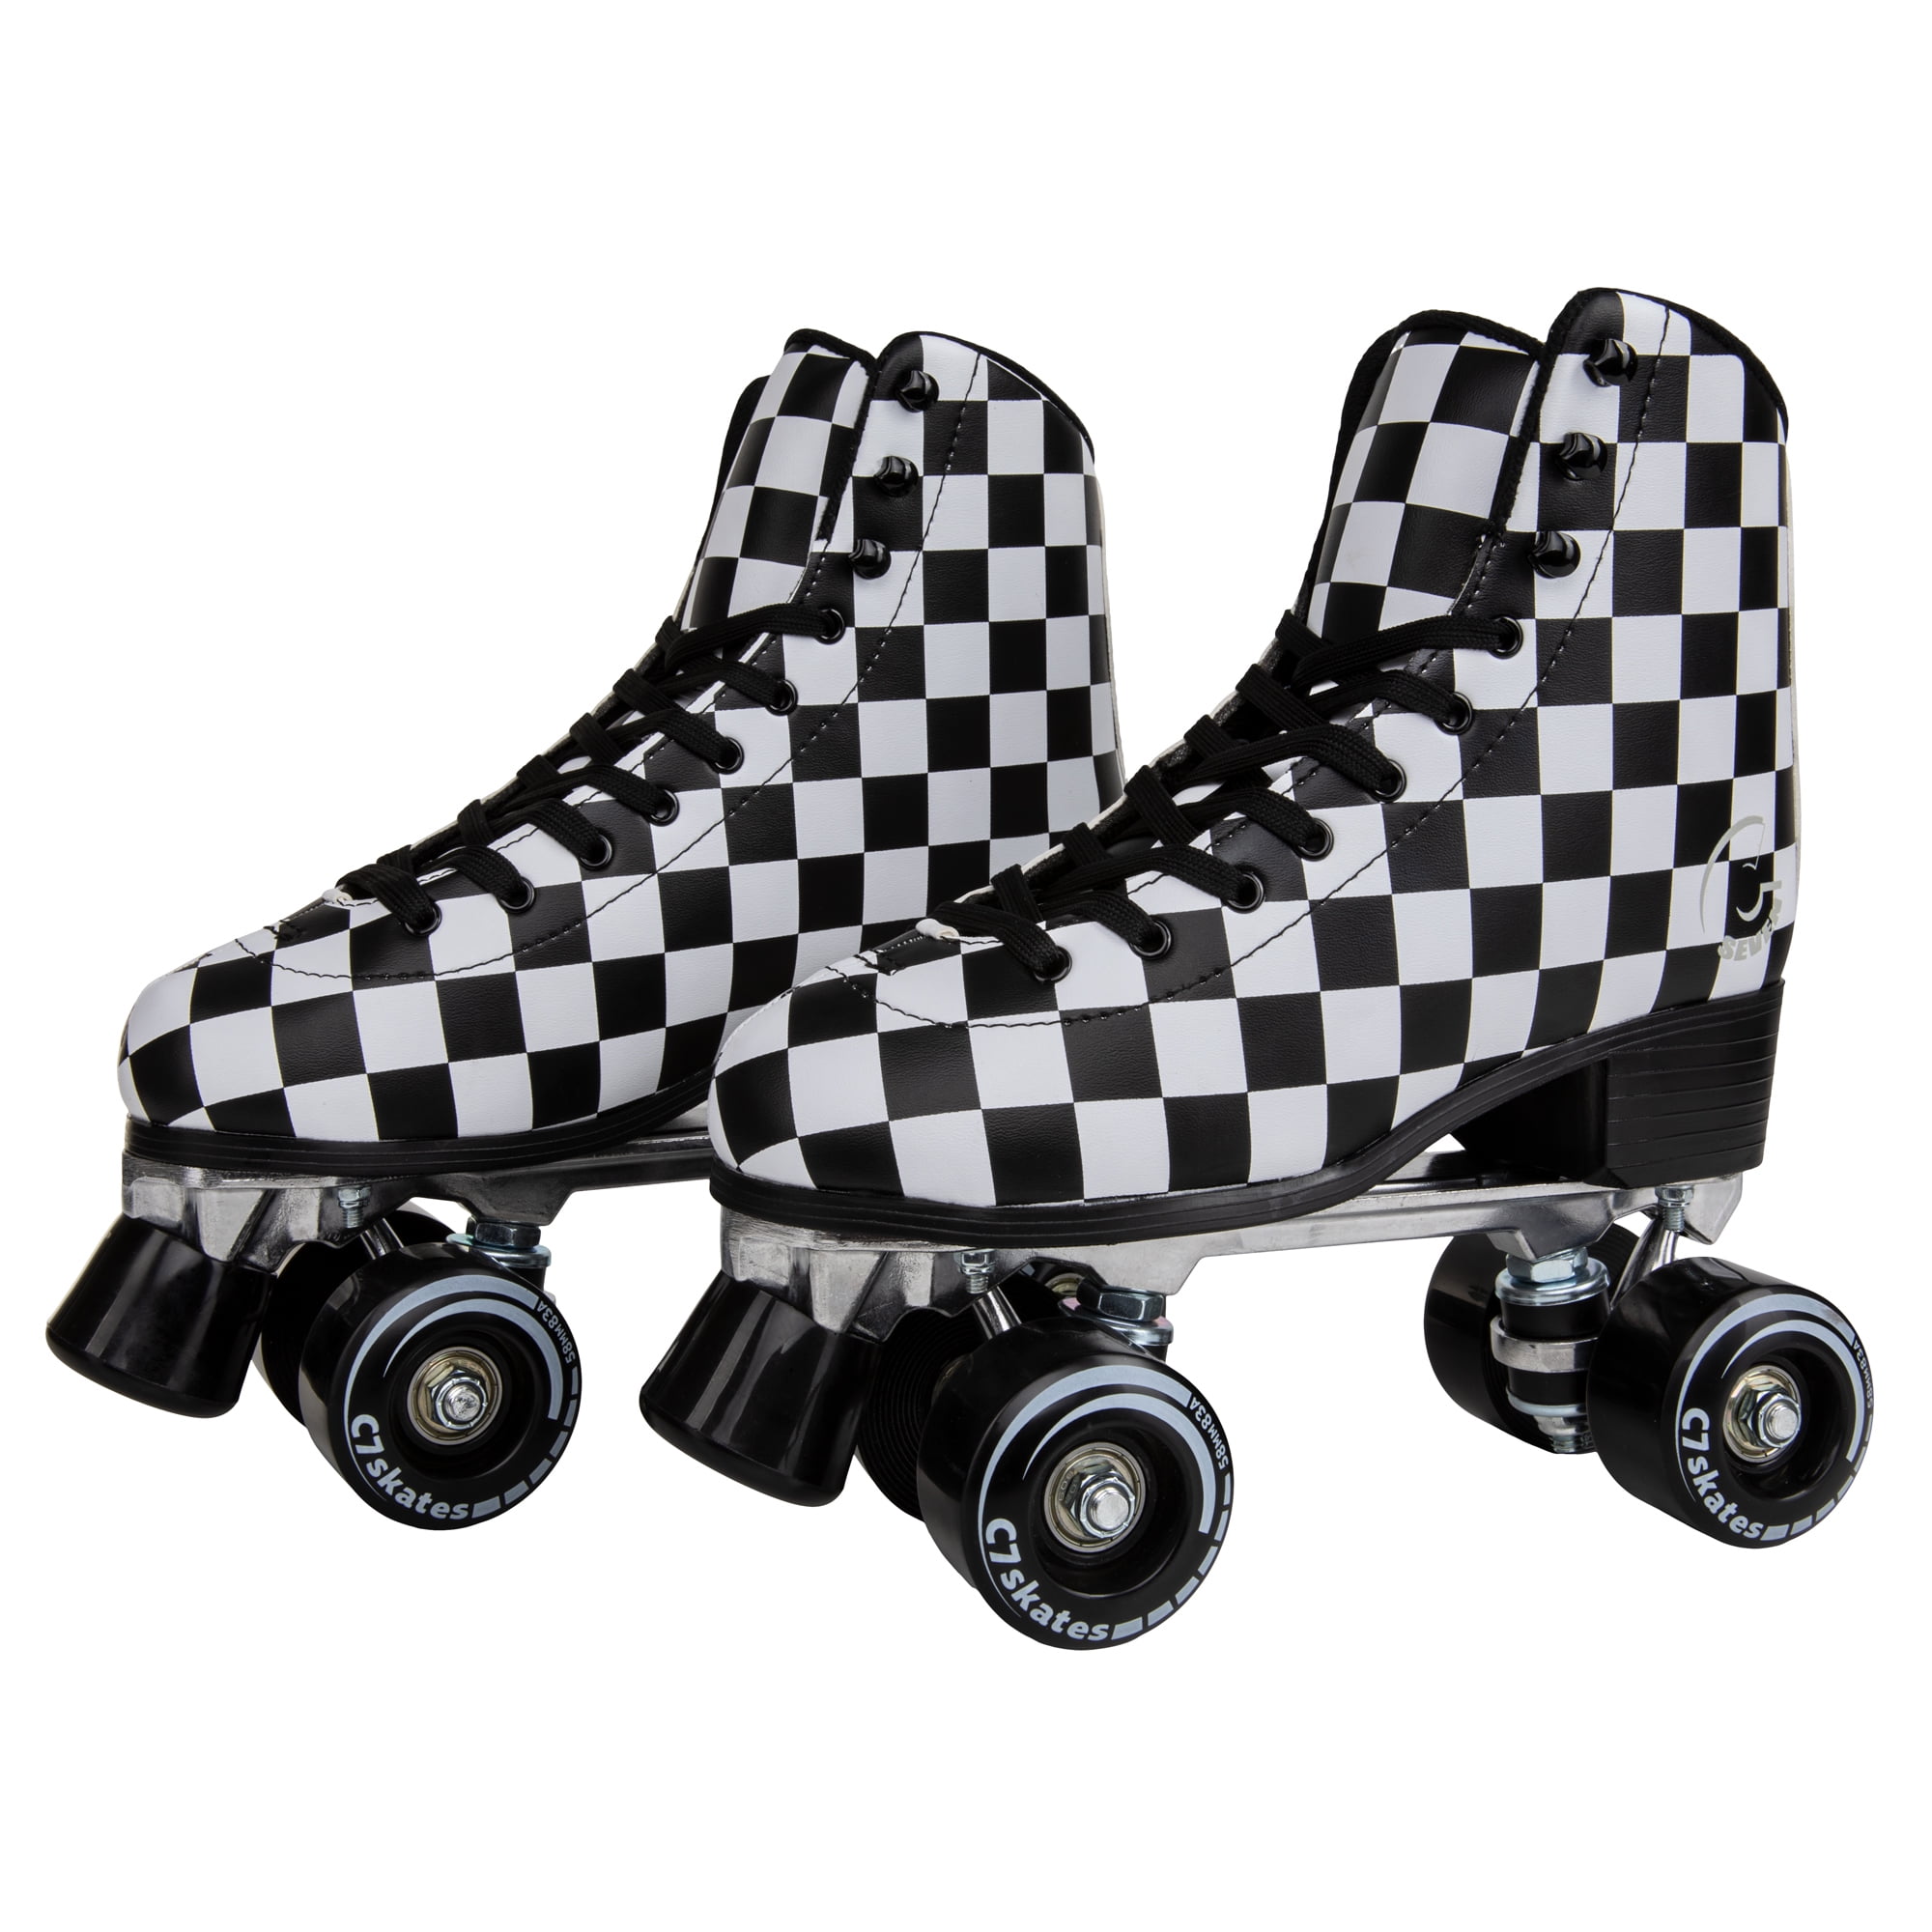 C SEVEN C7skates Cute Roller Skates for Girls and Adults 